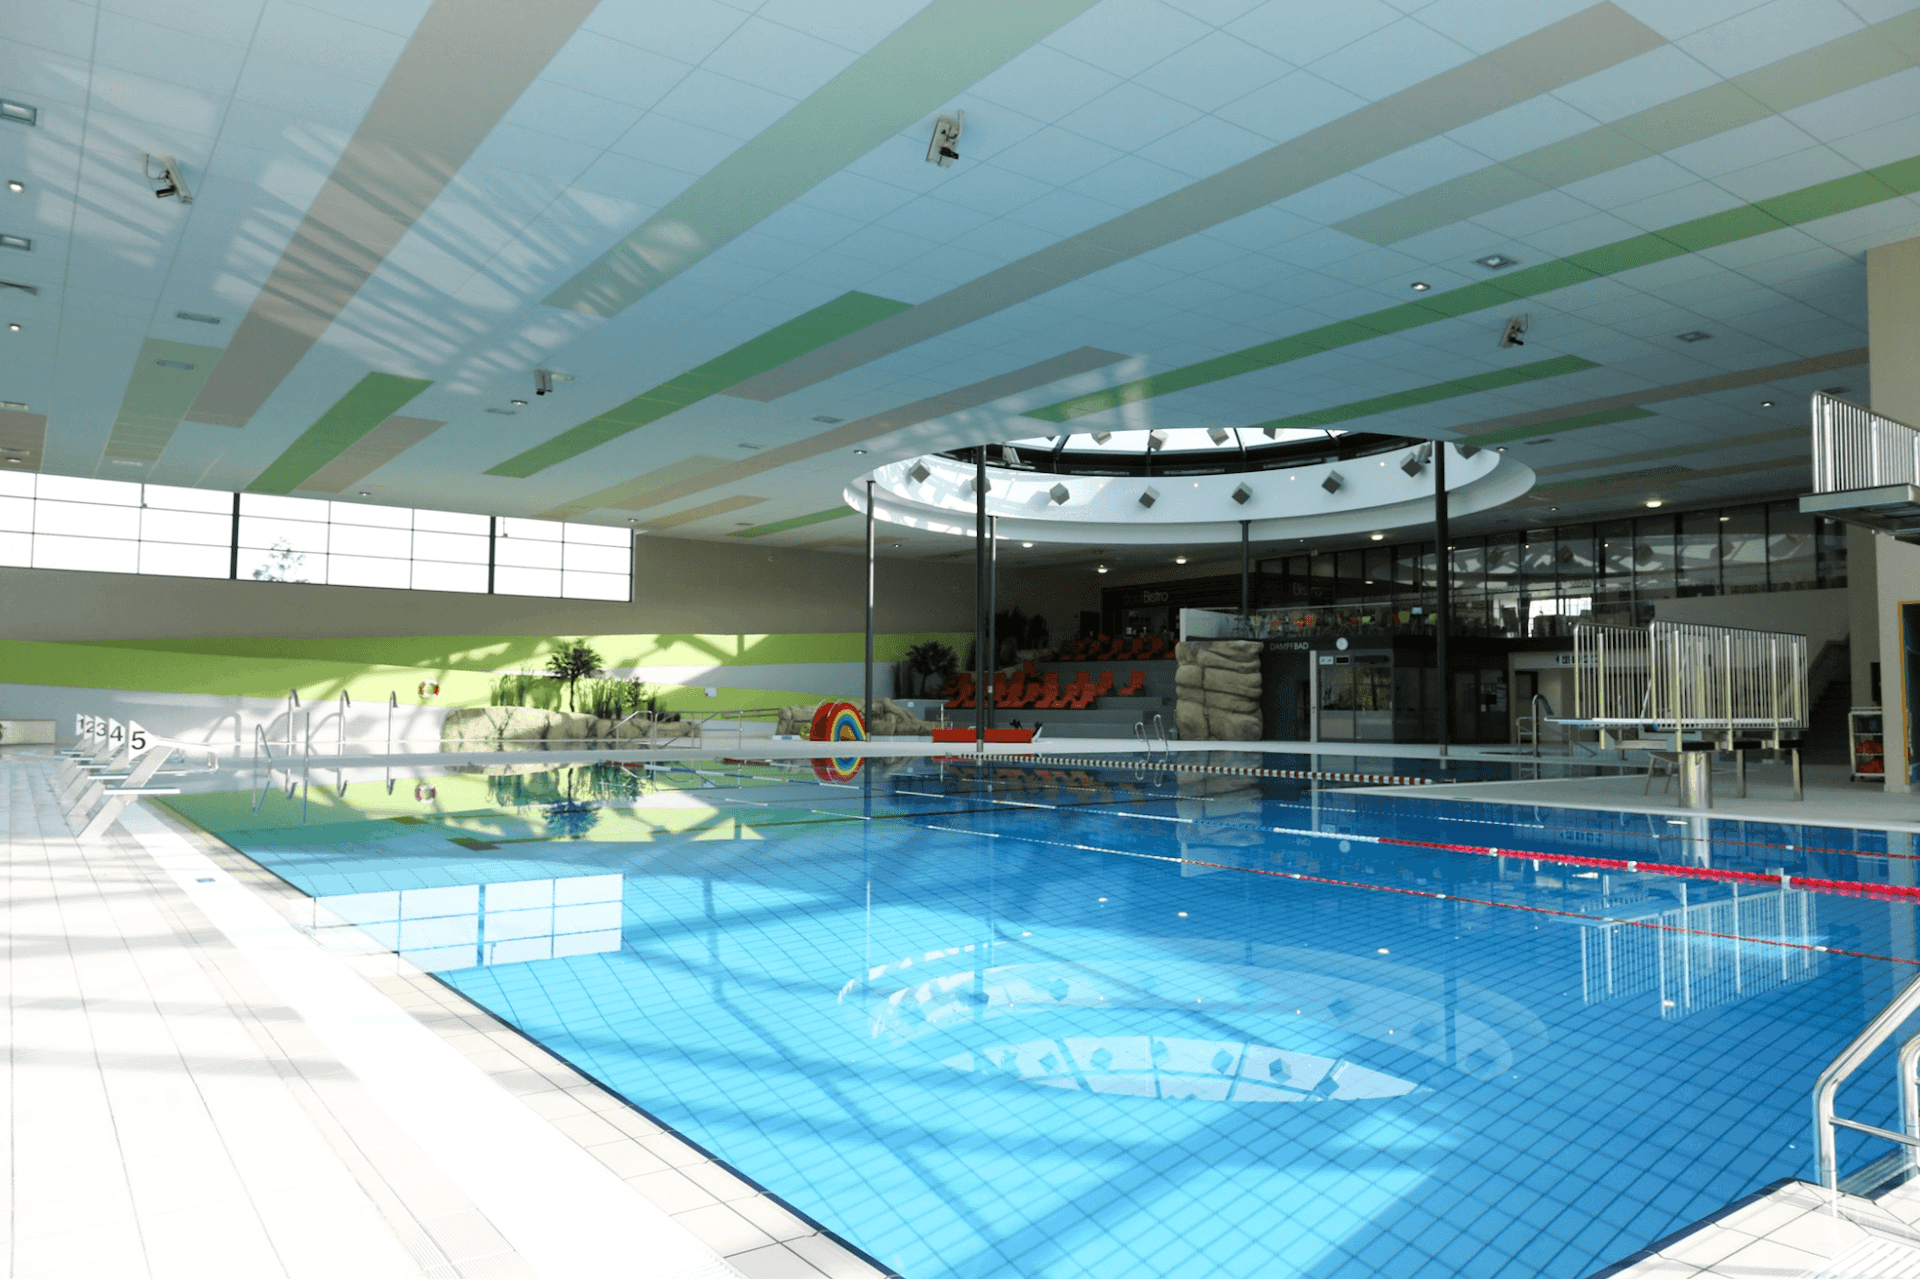 Facebook Page of the swimming pool